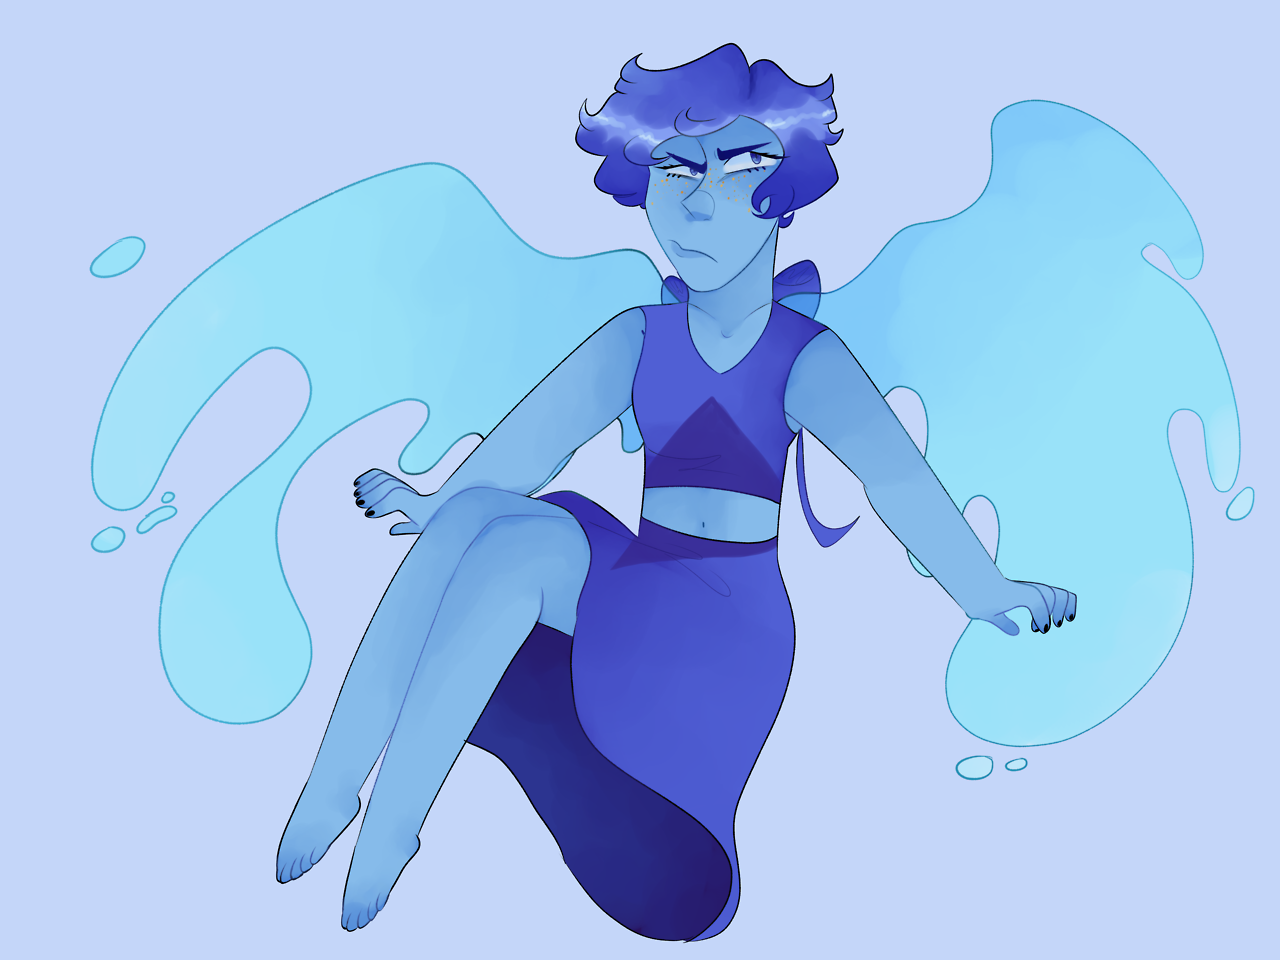 I haven’t drawn lapis in forever